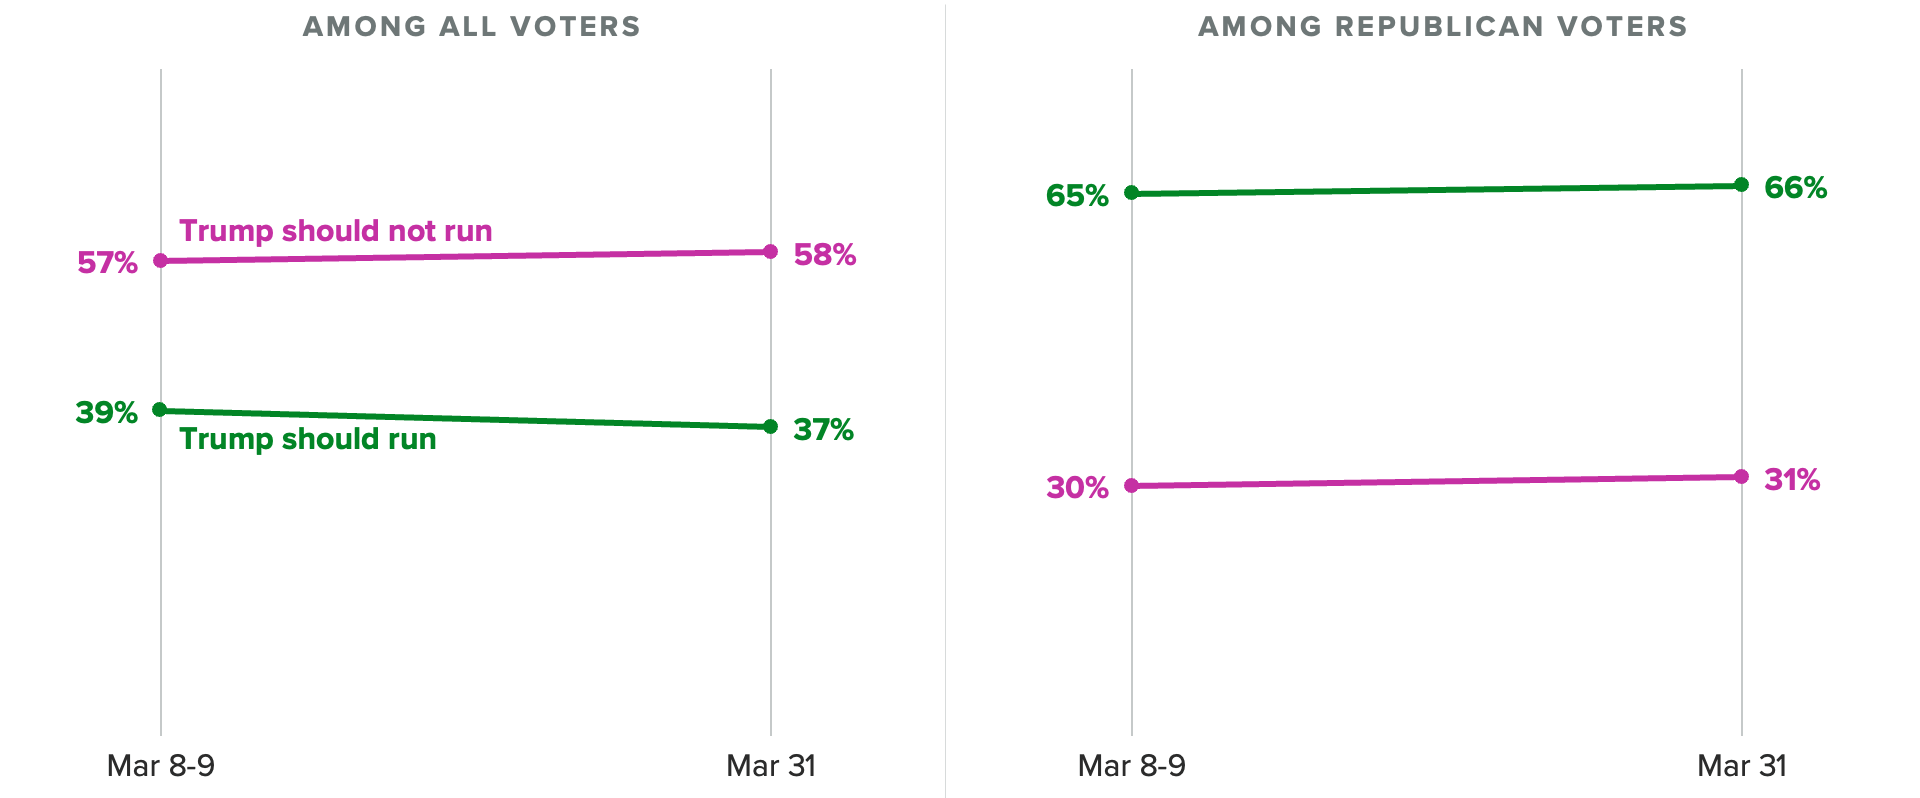 Trend line of the shares of voters who said former President Donald Trump should or should not run for president in the 2024 election, before and after news of his Manhattan indictment. The charts show 2 in 3 Republican voters say Trump should run for president, nearly unchanged from early March.